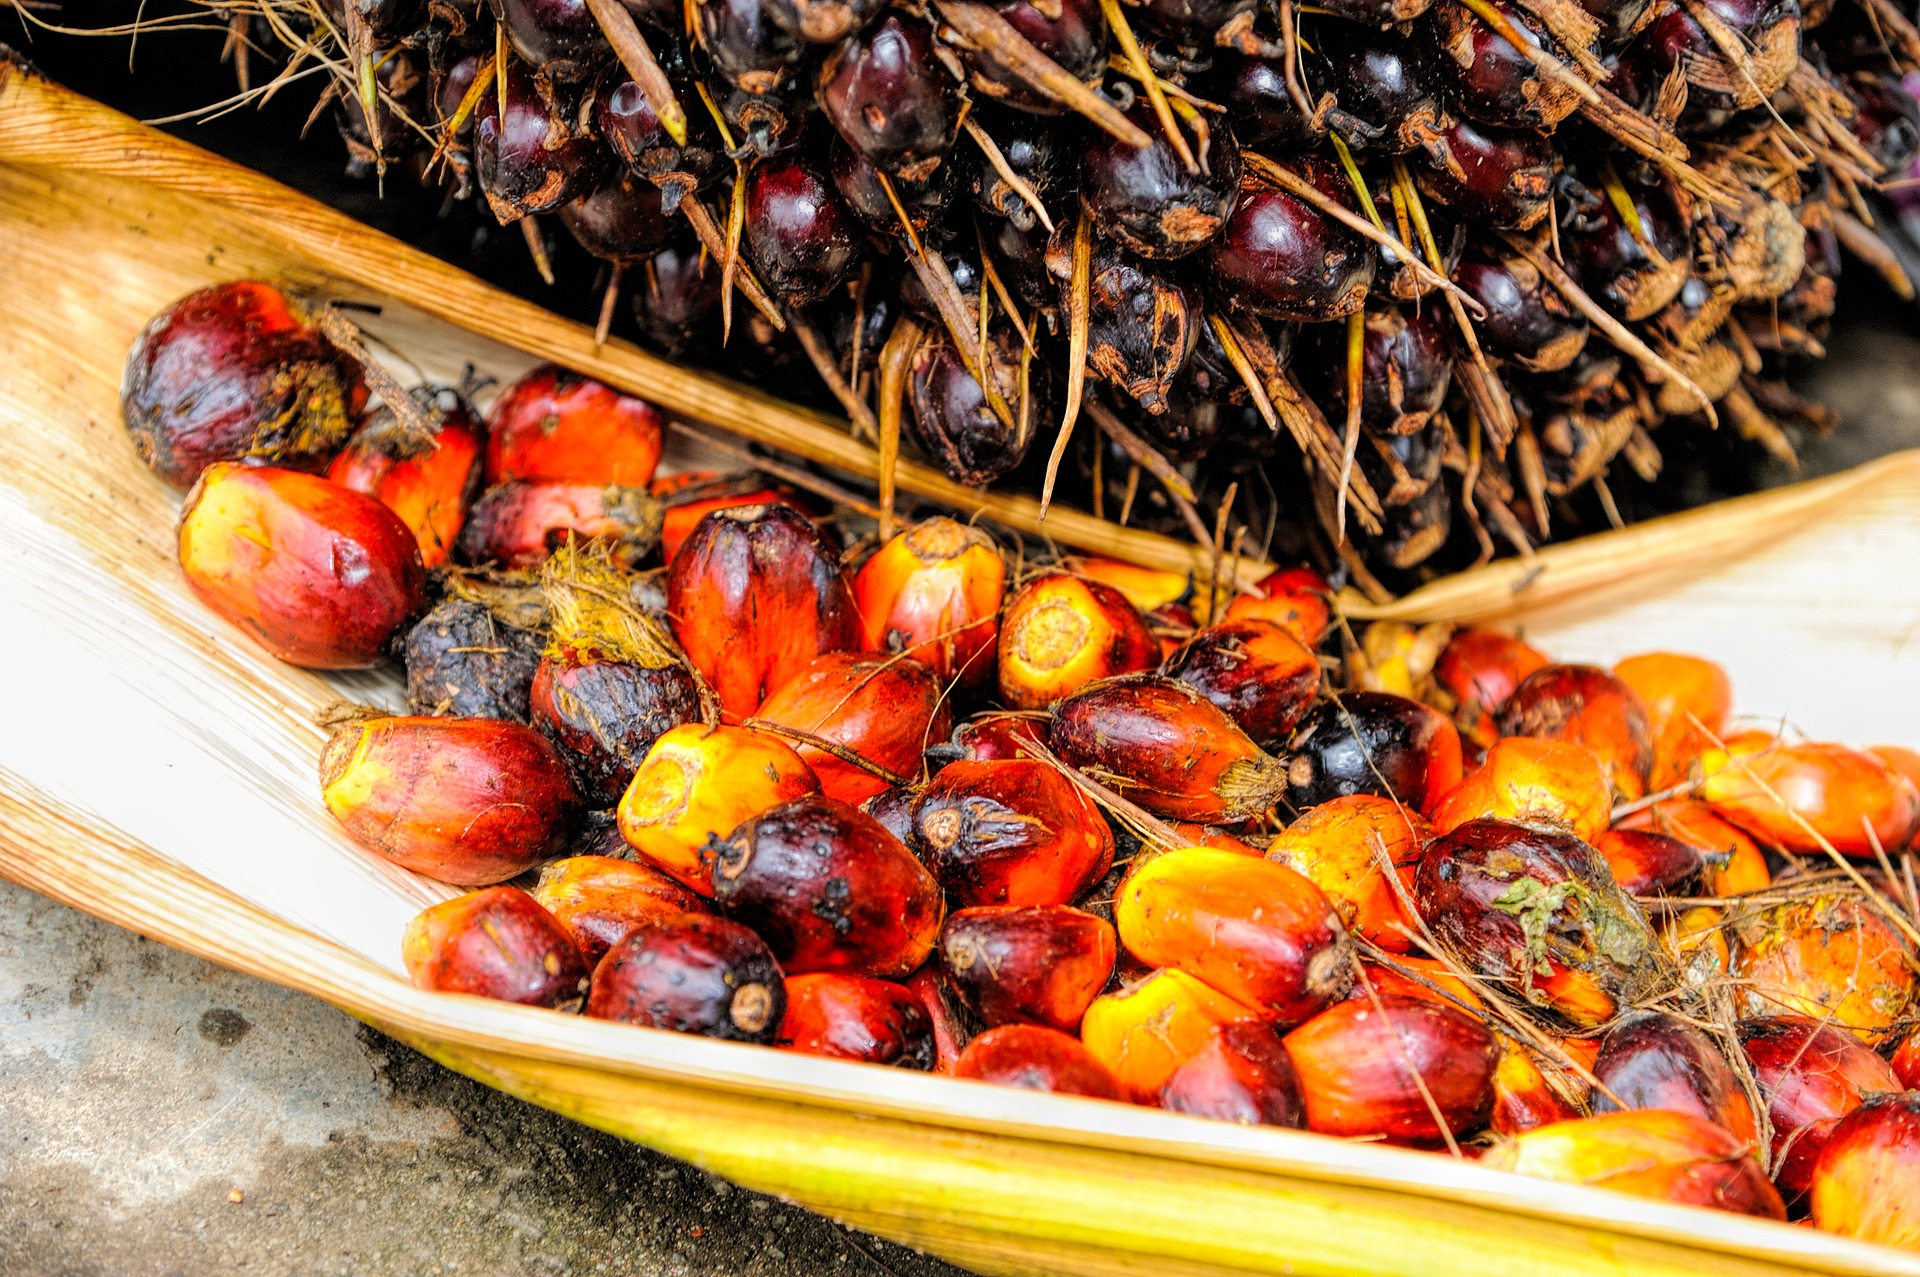 Sustainable Palm Oil/Biodiesel